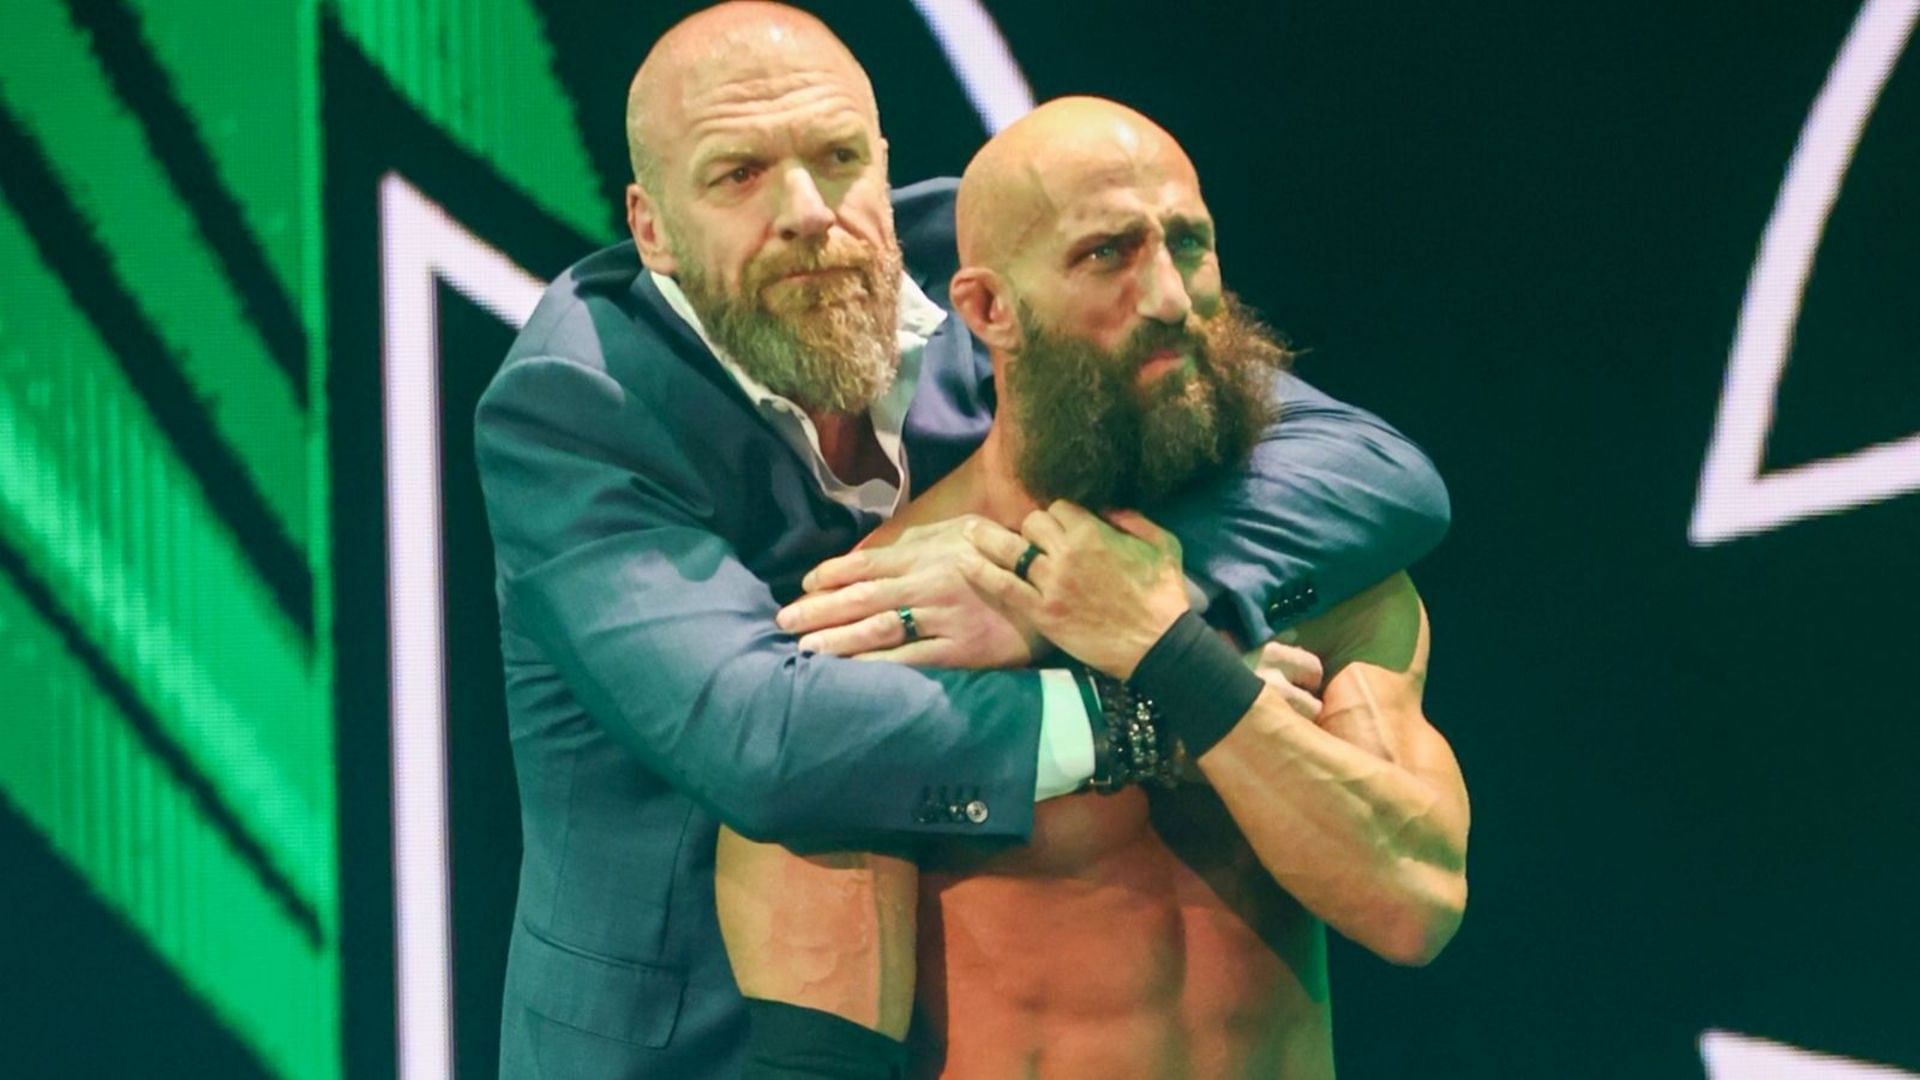 Triple H and Ciampa have a close relationship